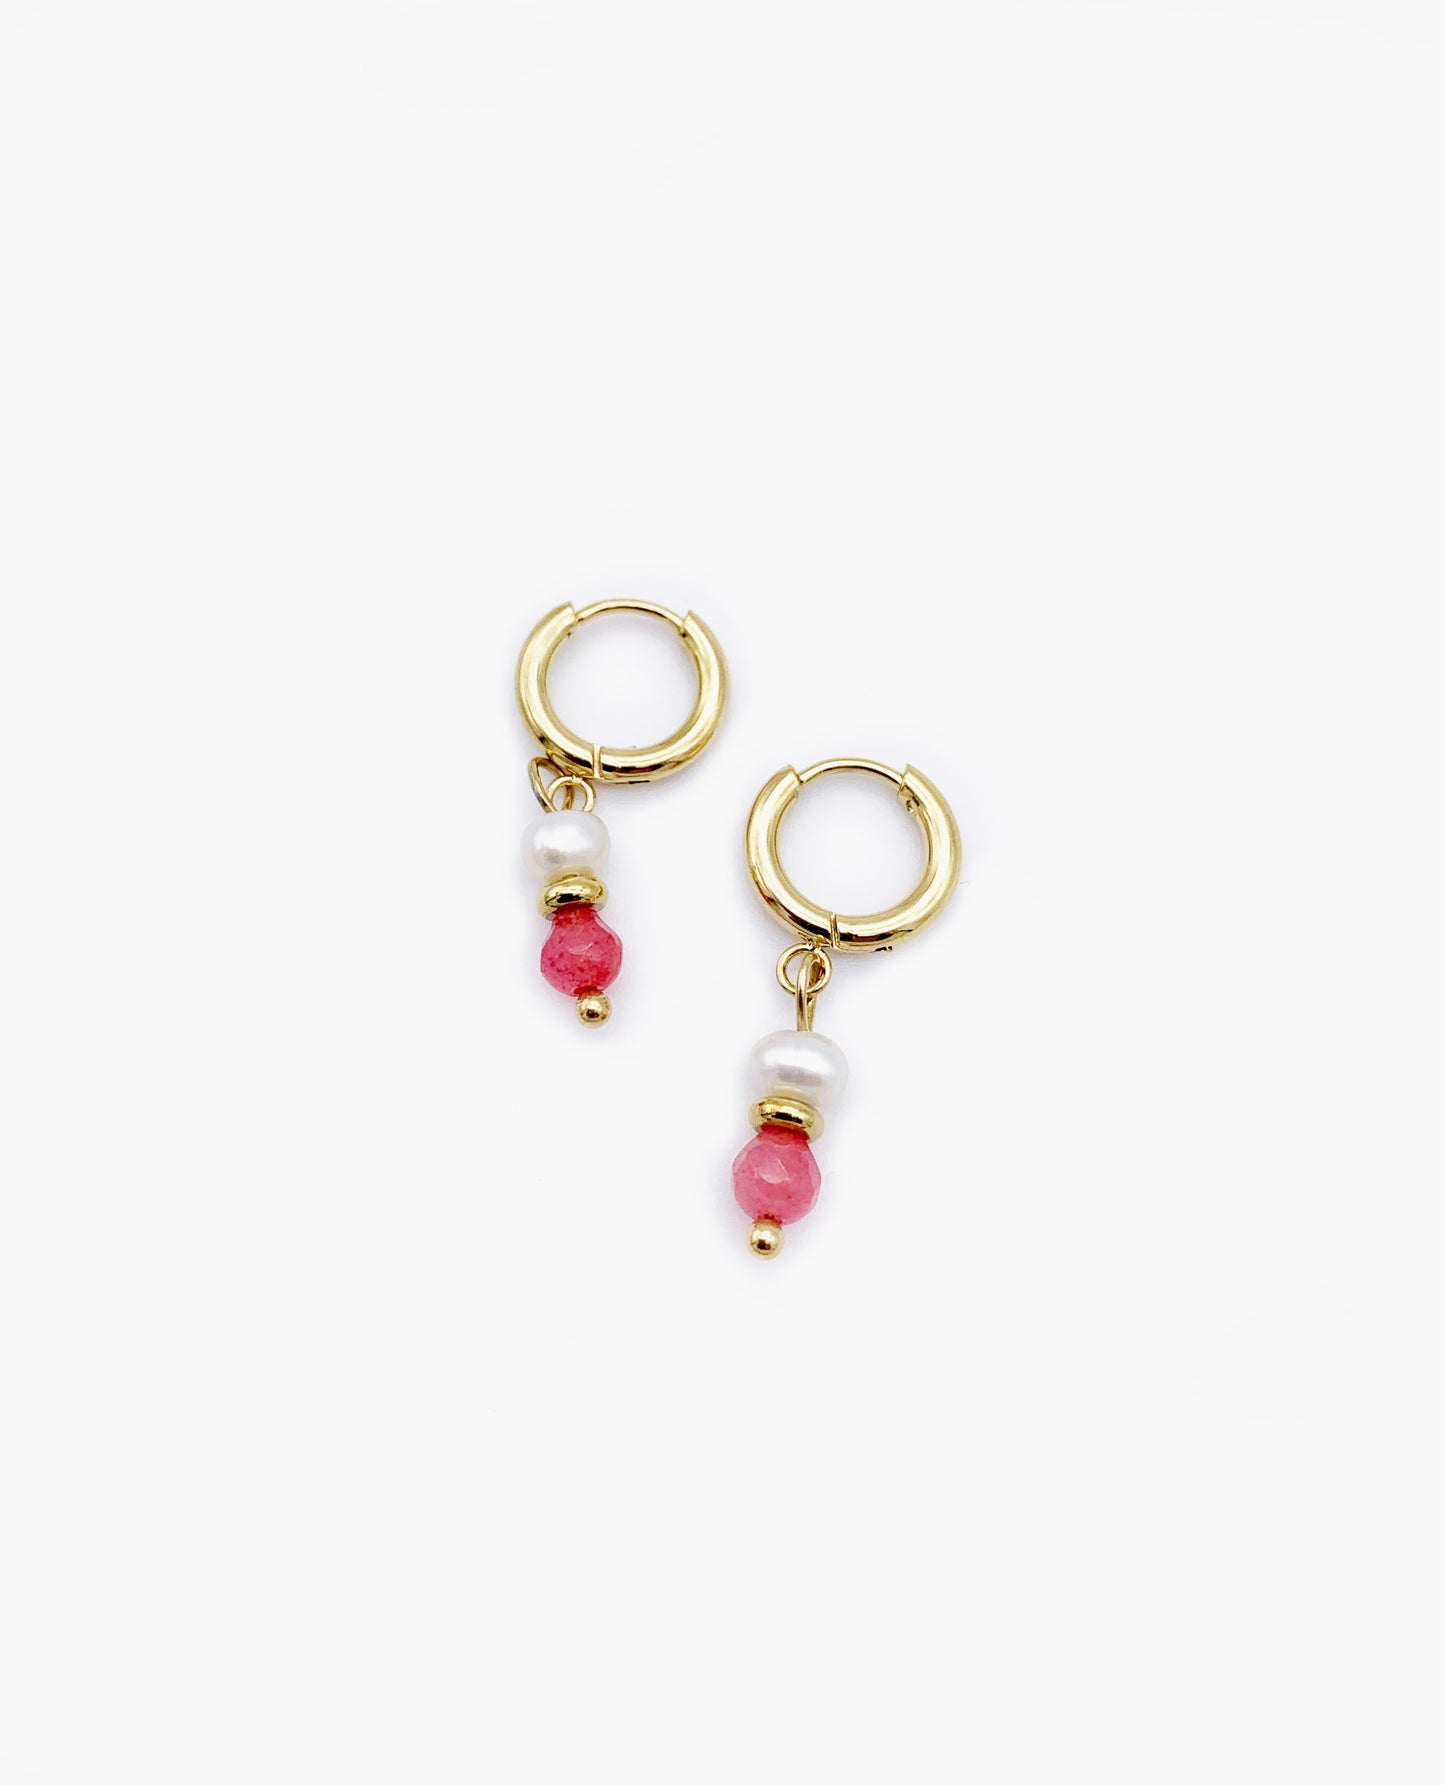 PINK STONES AND PEARLS EARRINGS